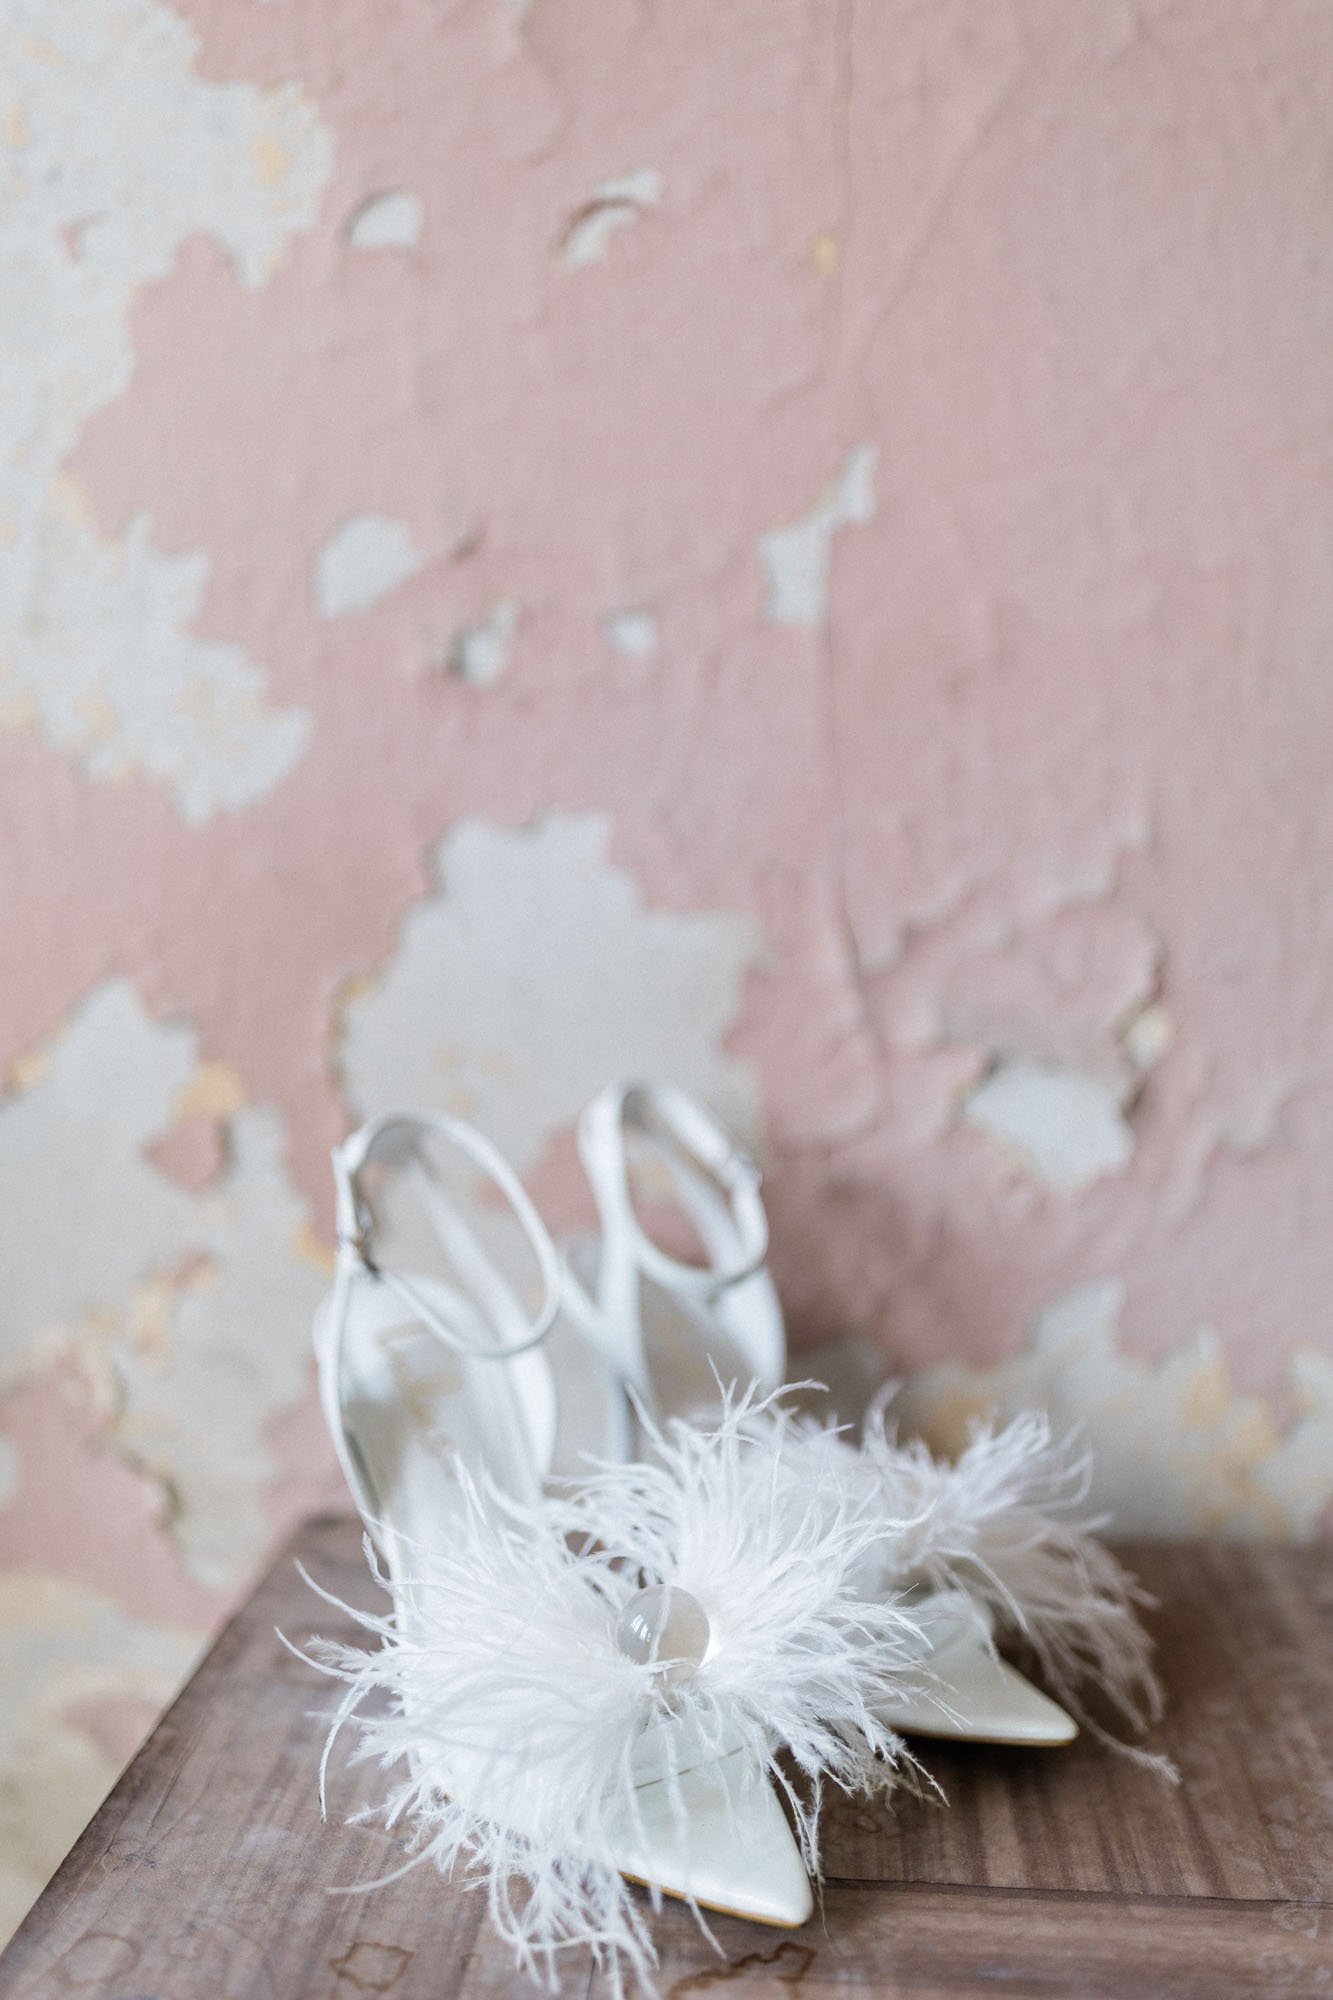  a lovely pair of white bridal shoes. they are high heels with open pointed toes and large white feather accents. they are on a wood table in front of a wall with peeling pink paint. 